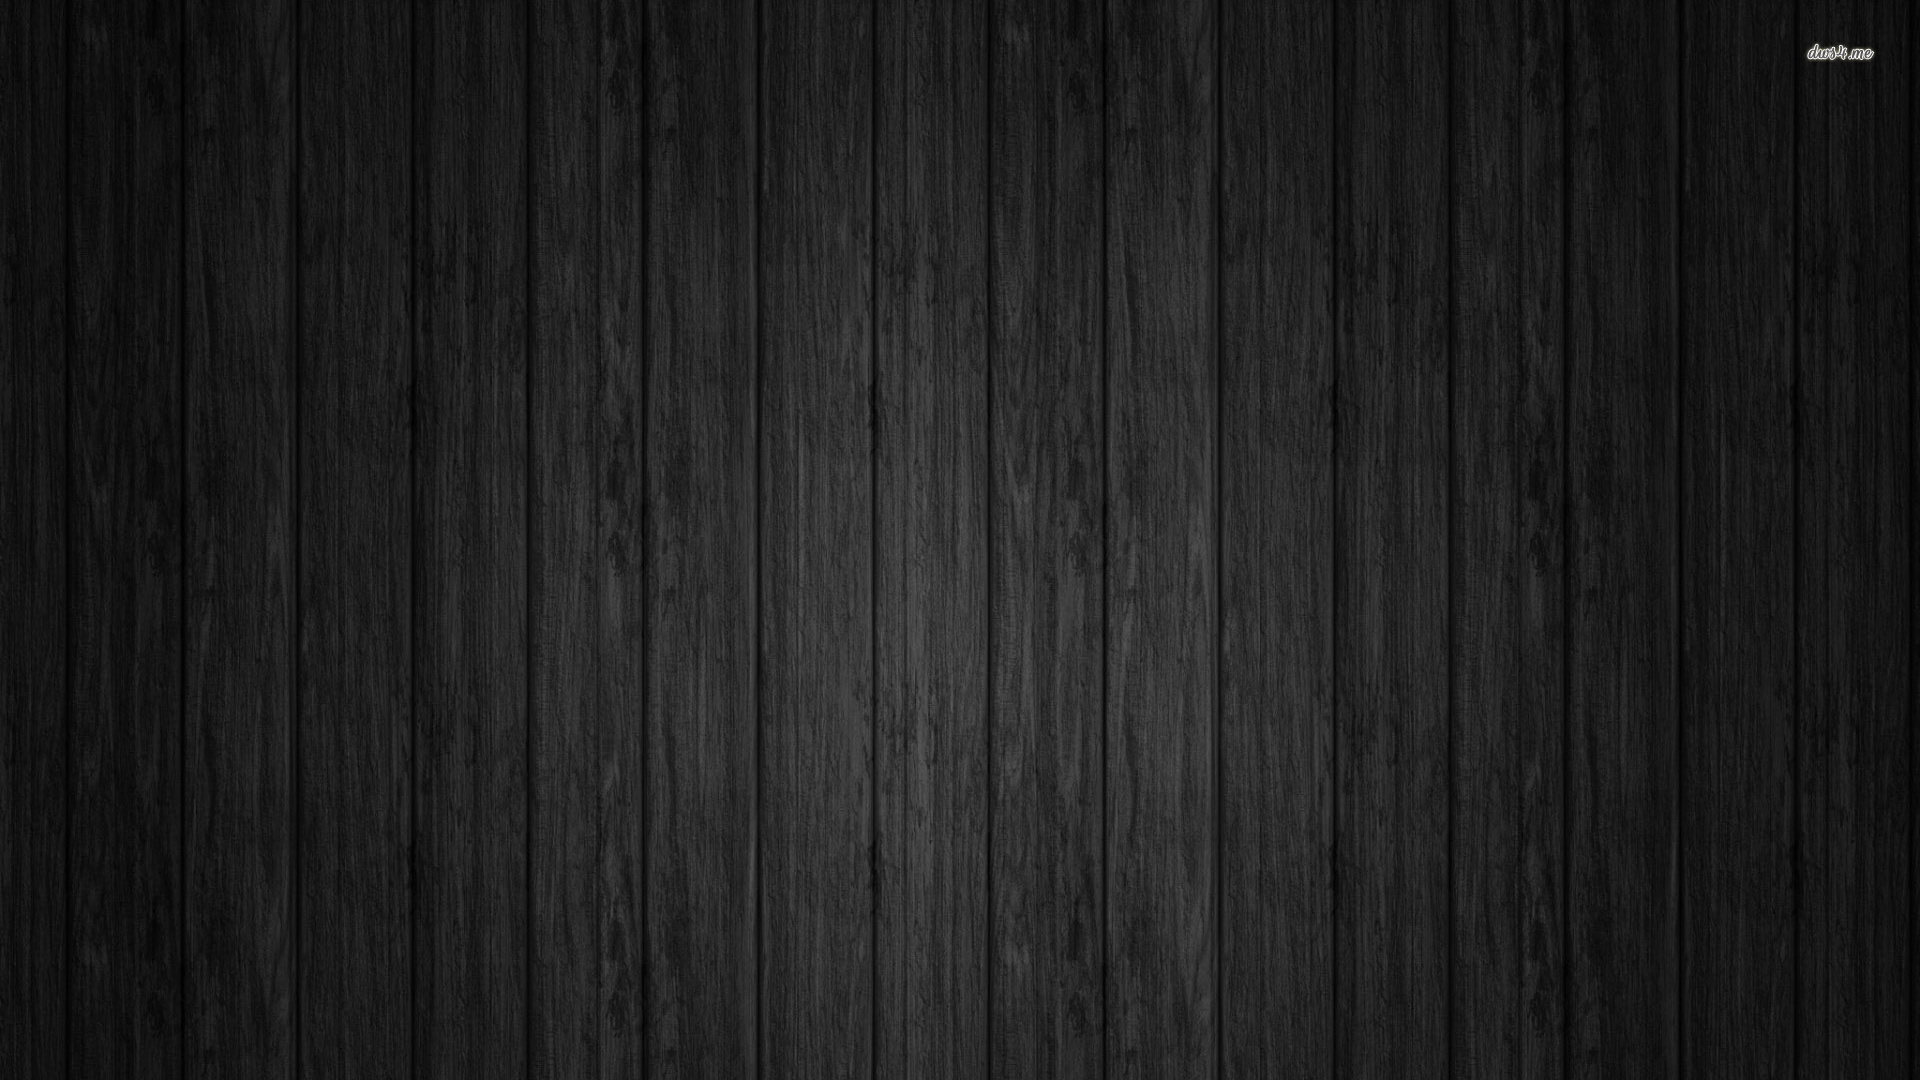 Leather Texture Black Wallpaper Abstract Wooden Textured